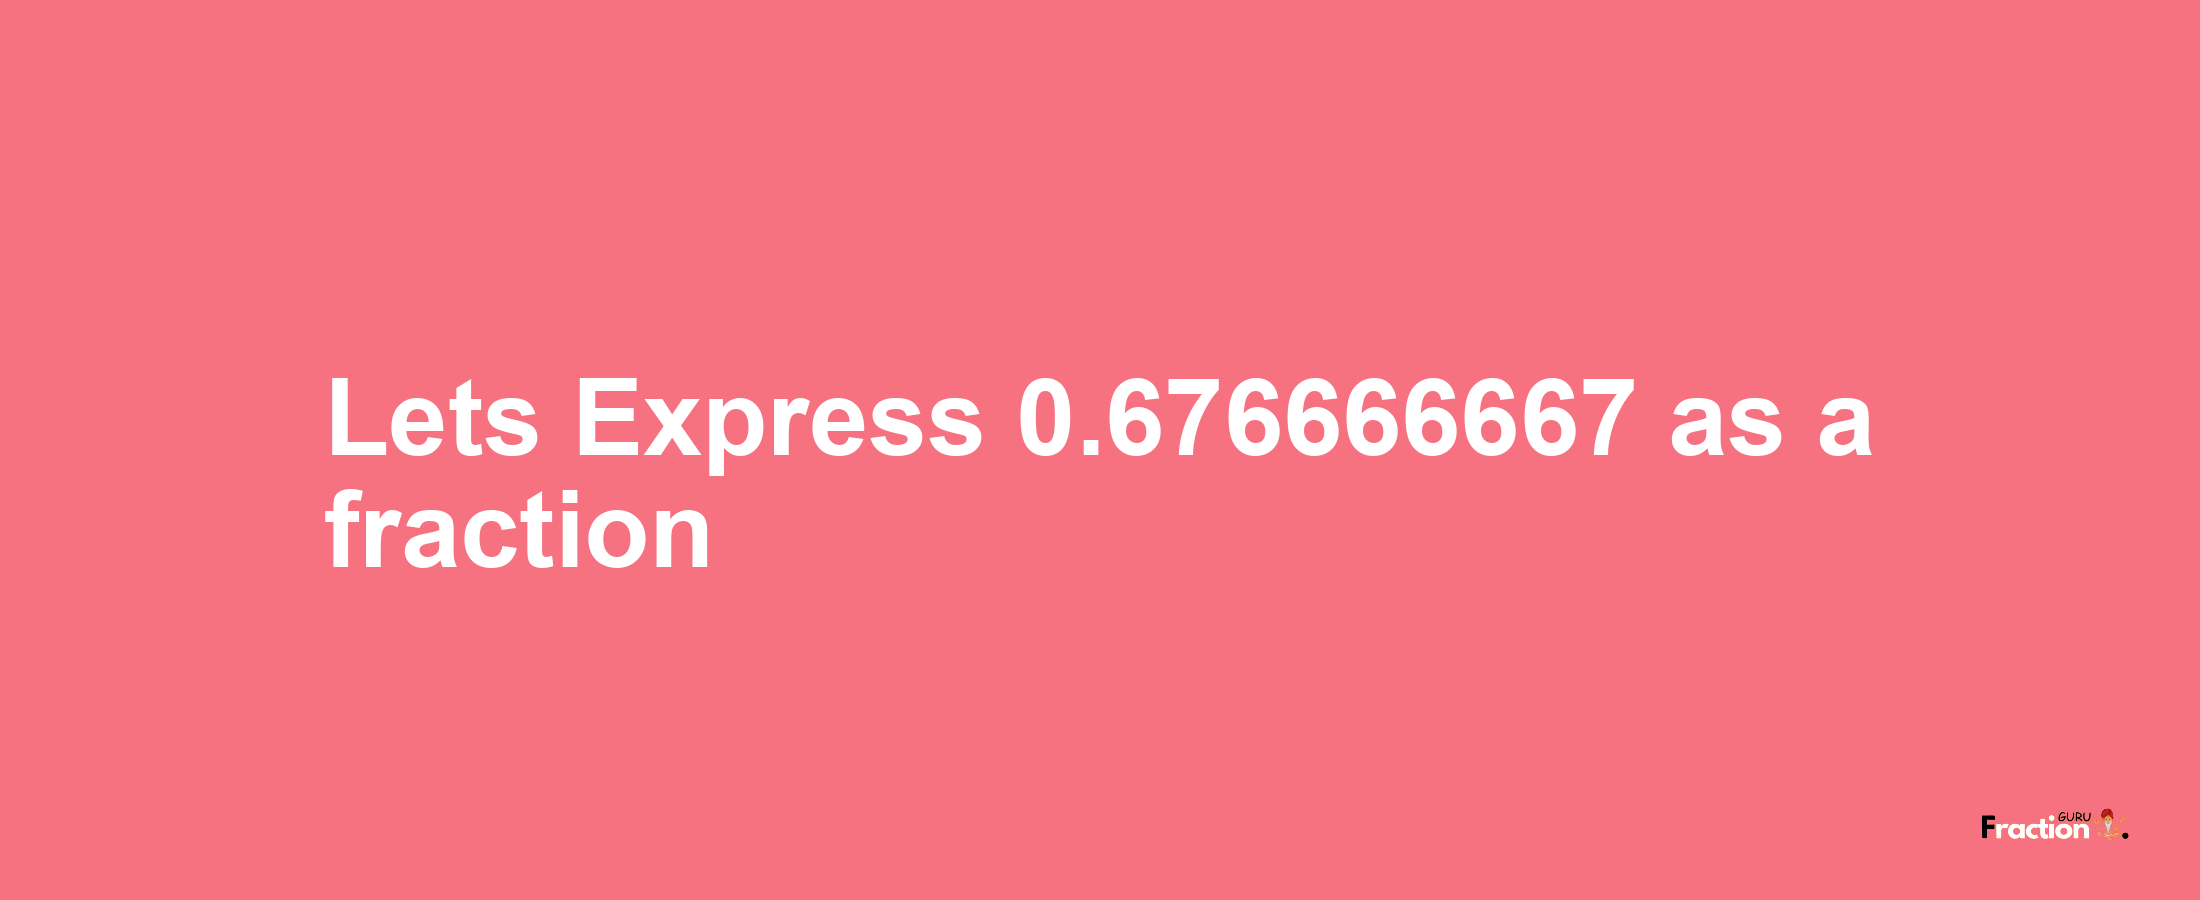 Lets Express 0.676666667 as afraction